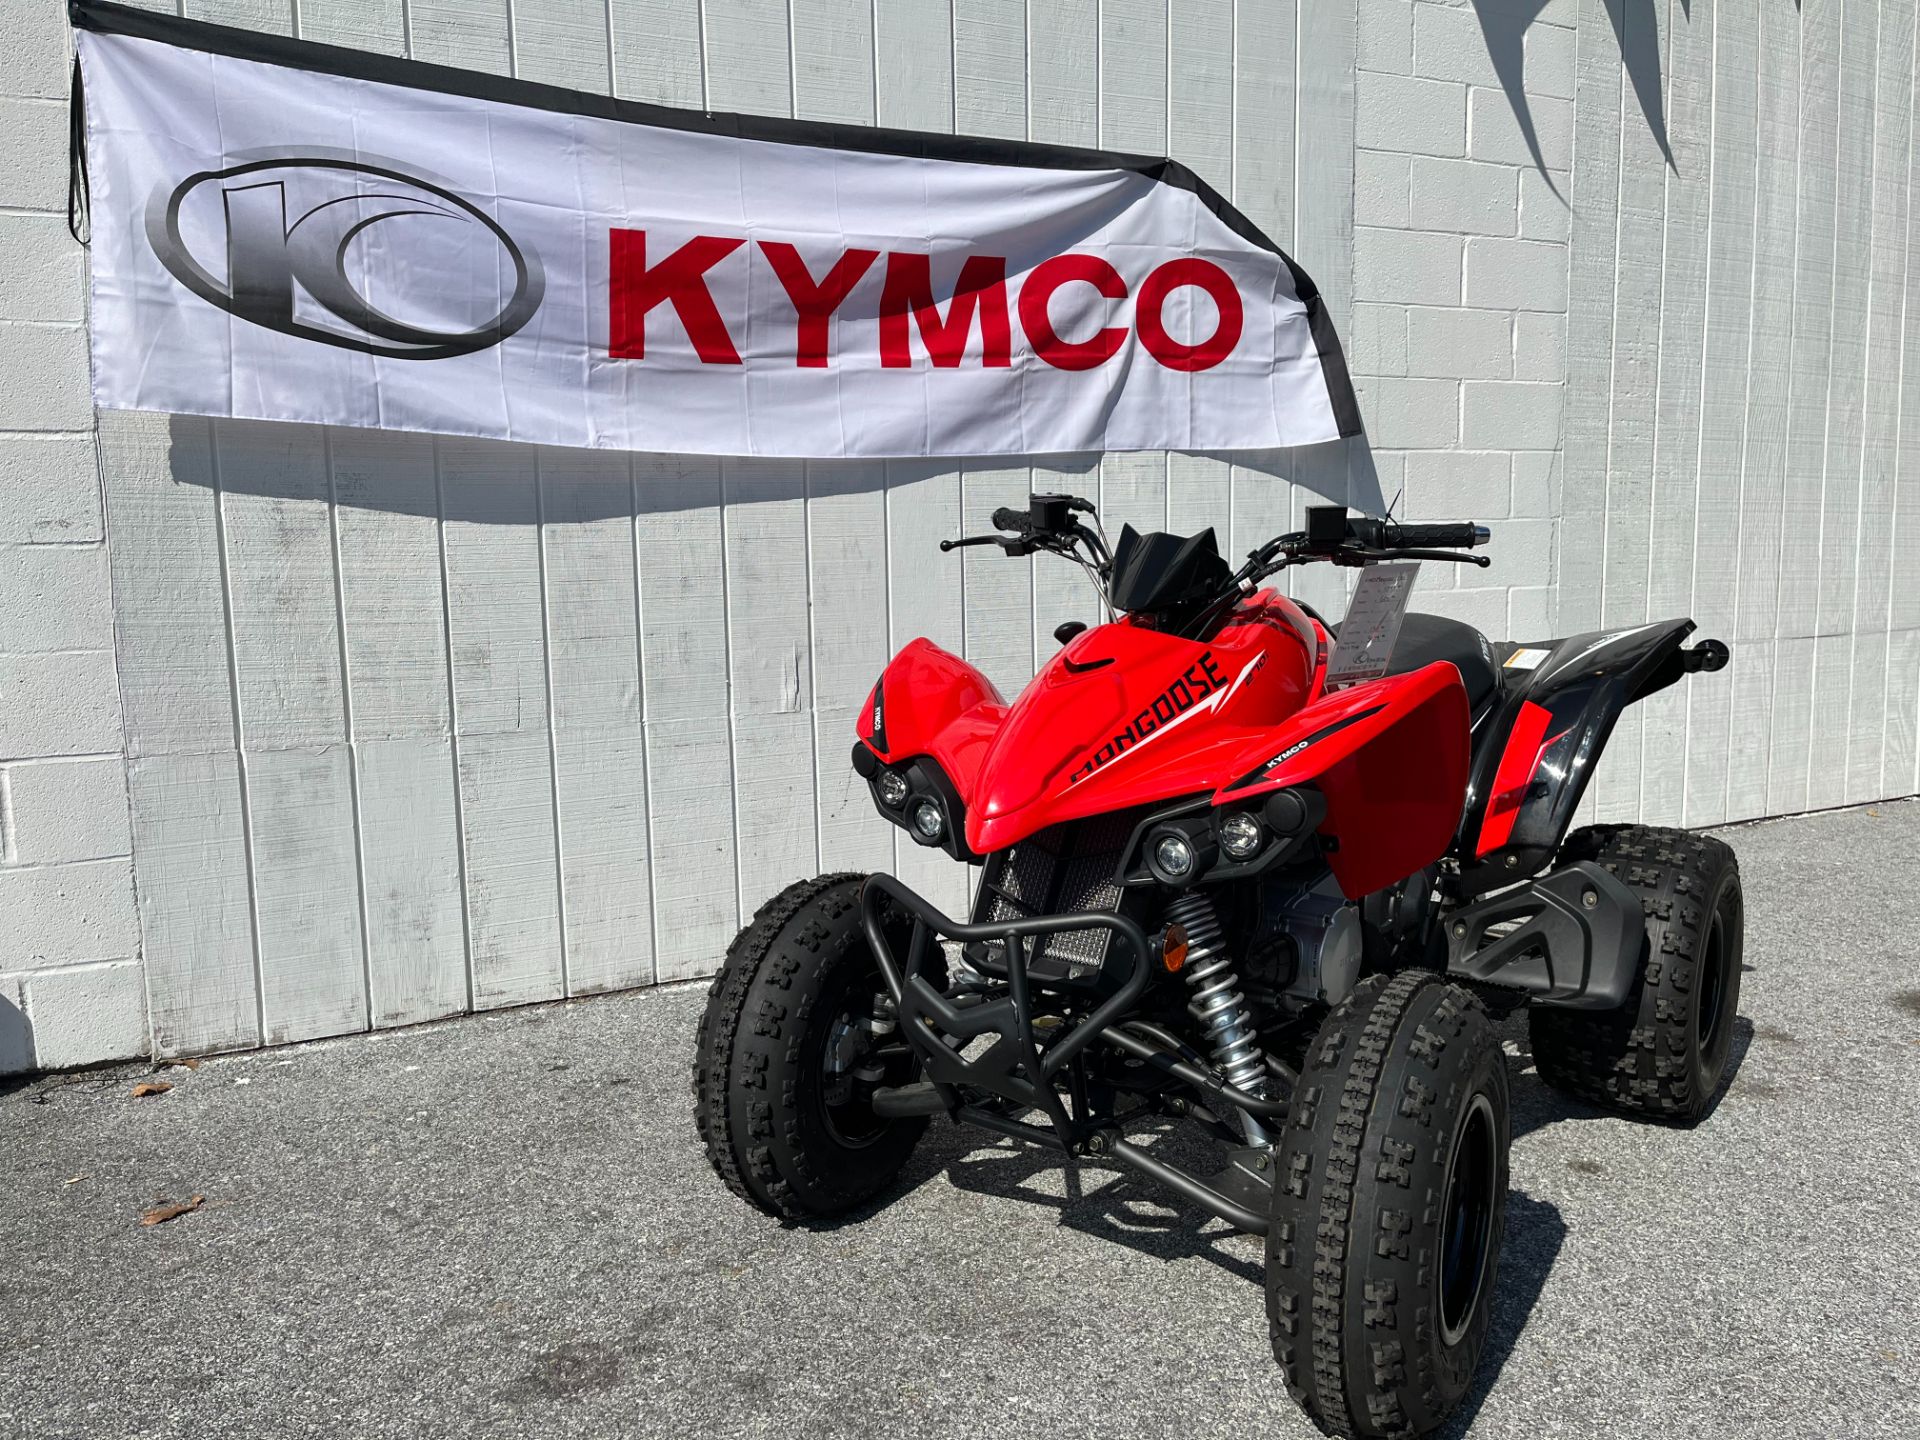 2023 Kymco Mongoose 270i in West Chester, Pennsylvania - Photo 1